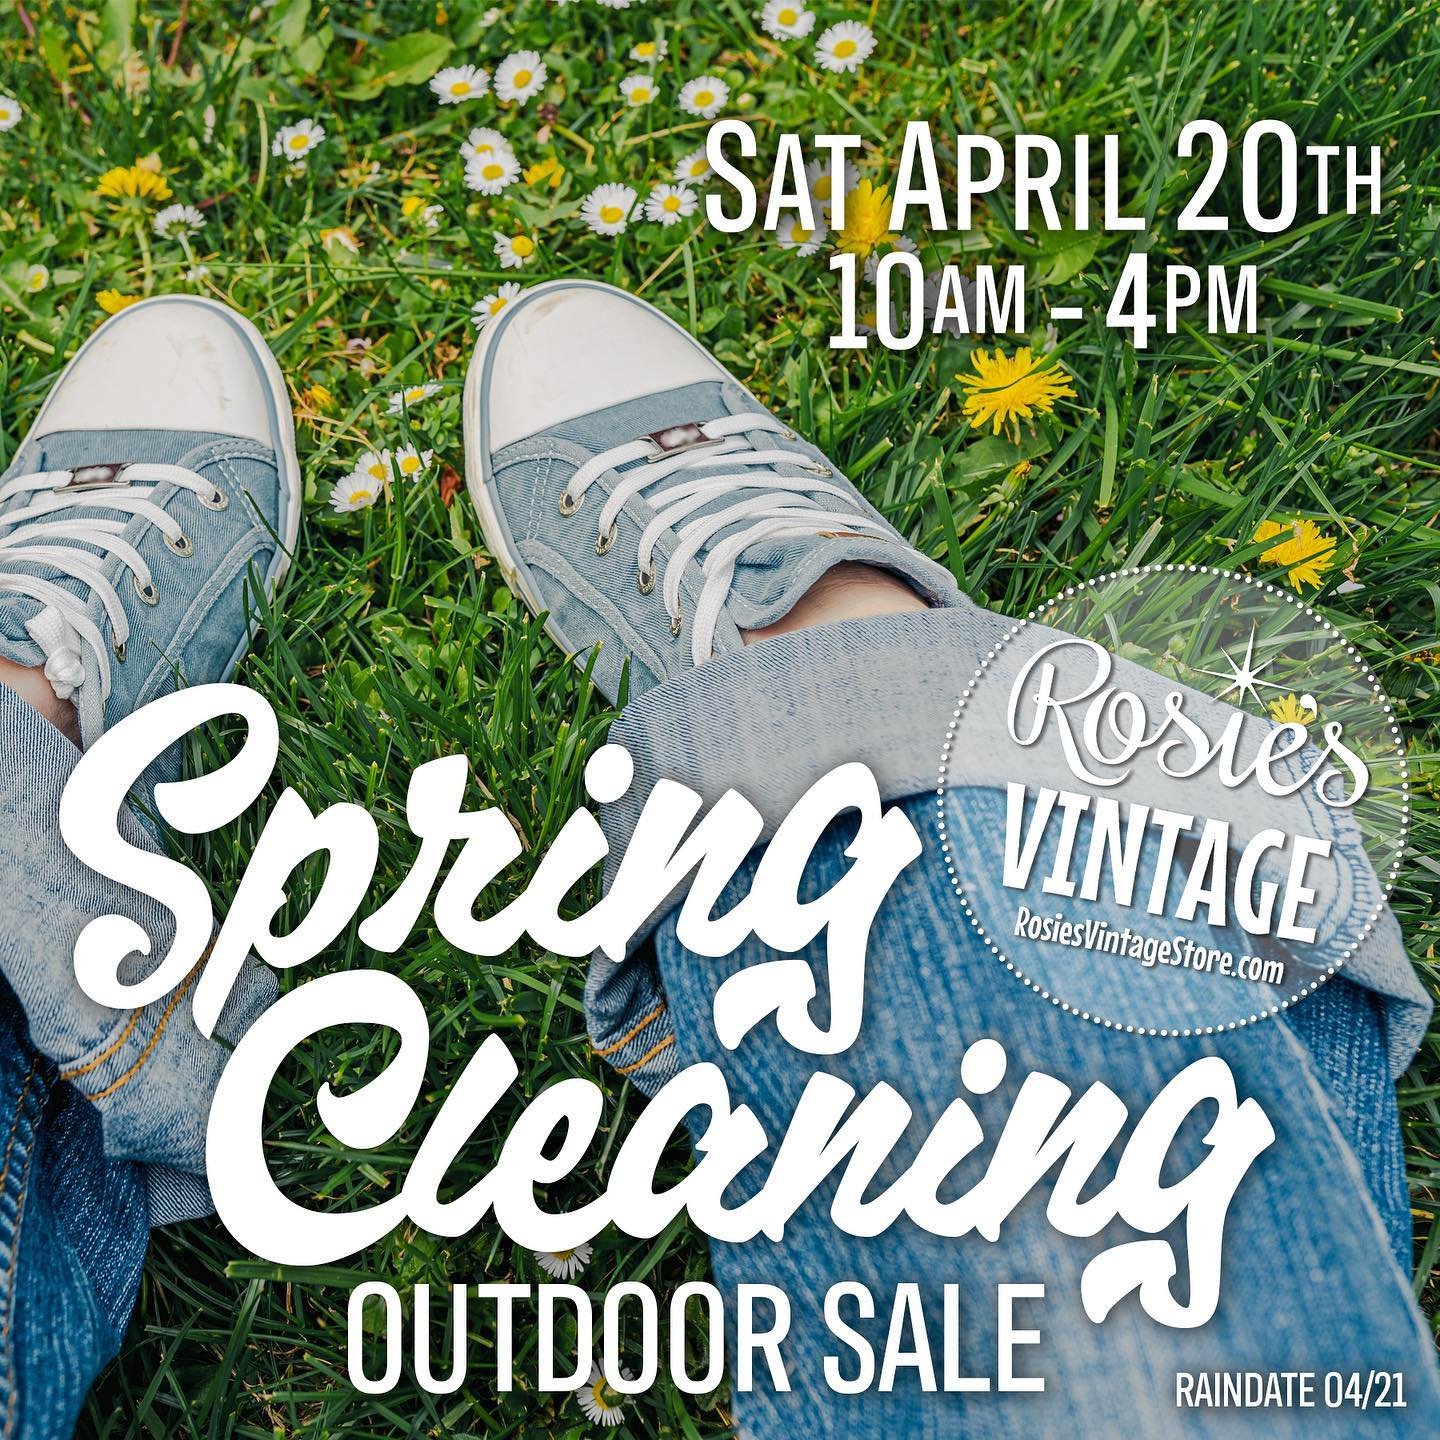 ✨Rosie&rsquo;s Vintage Spring Cleaning Outdoor Sale✨

What better way to celebrate a beautiful Spring day but to go to an Outdoor Sale!  Rosie&rsquo;s Dealers have been buying merchandise all Winter and they kinda overstocked a bit&hellip; so they re